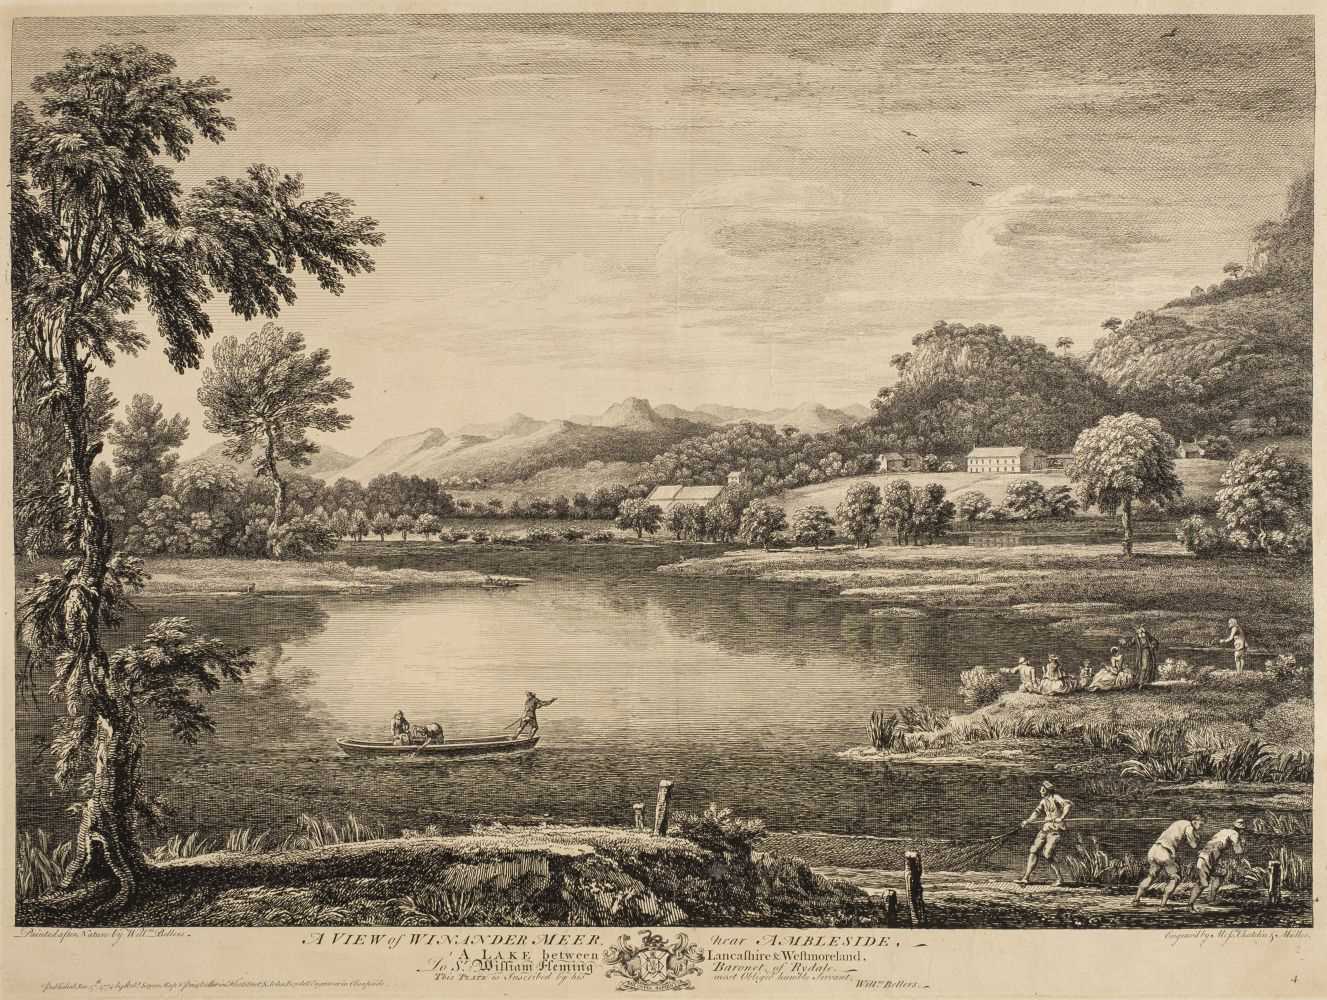 Lot 13 - Bellers (William, active 1734-1773). A View of Derwent-Water from Vicars Island, 1774